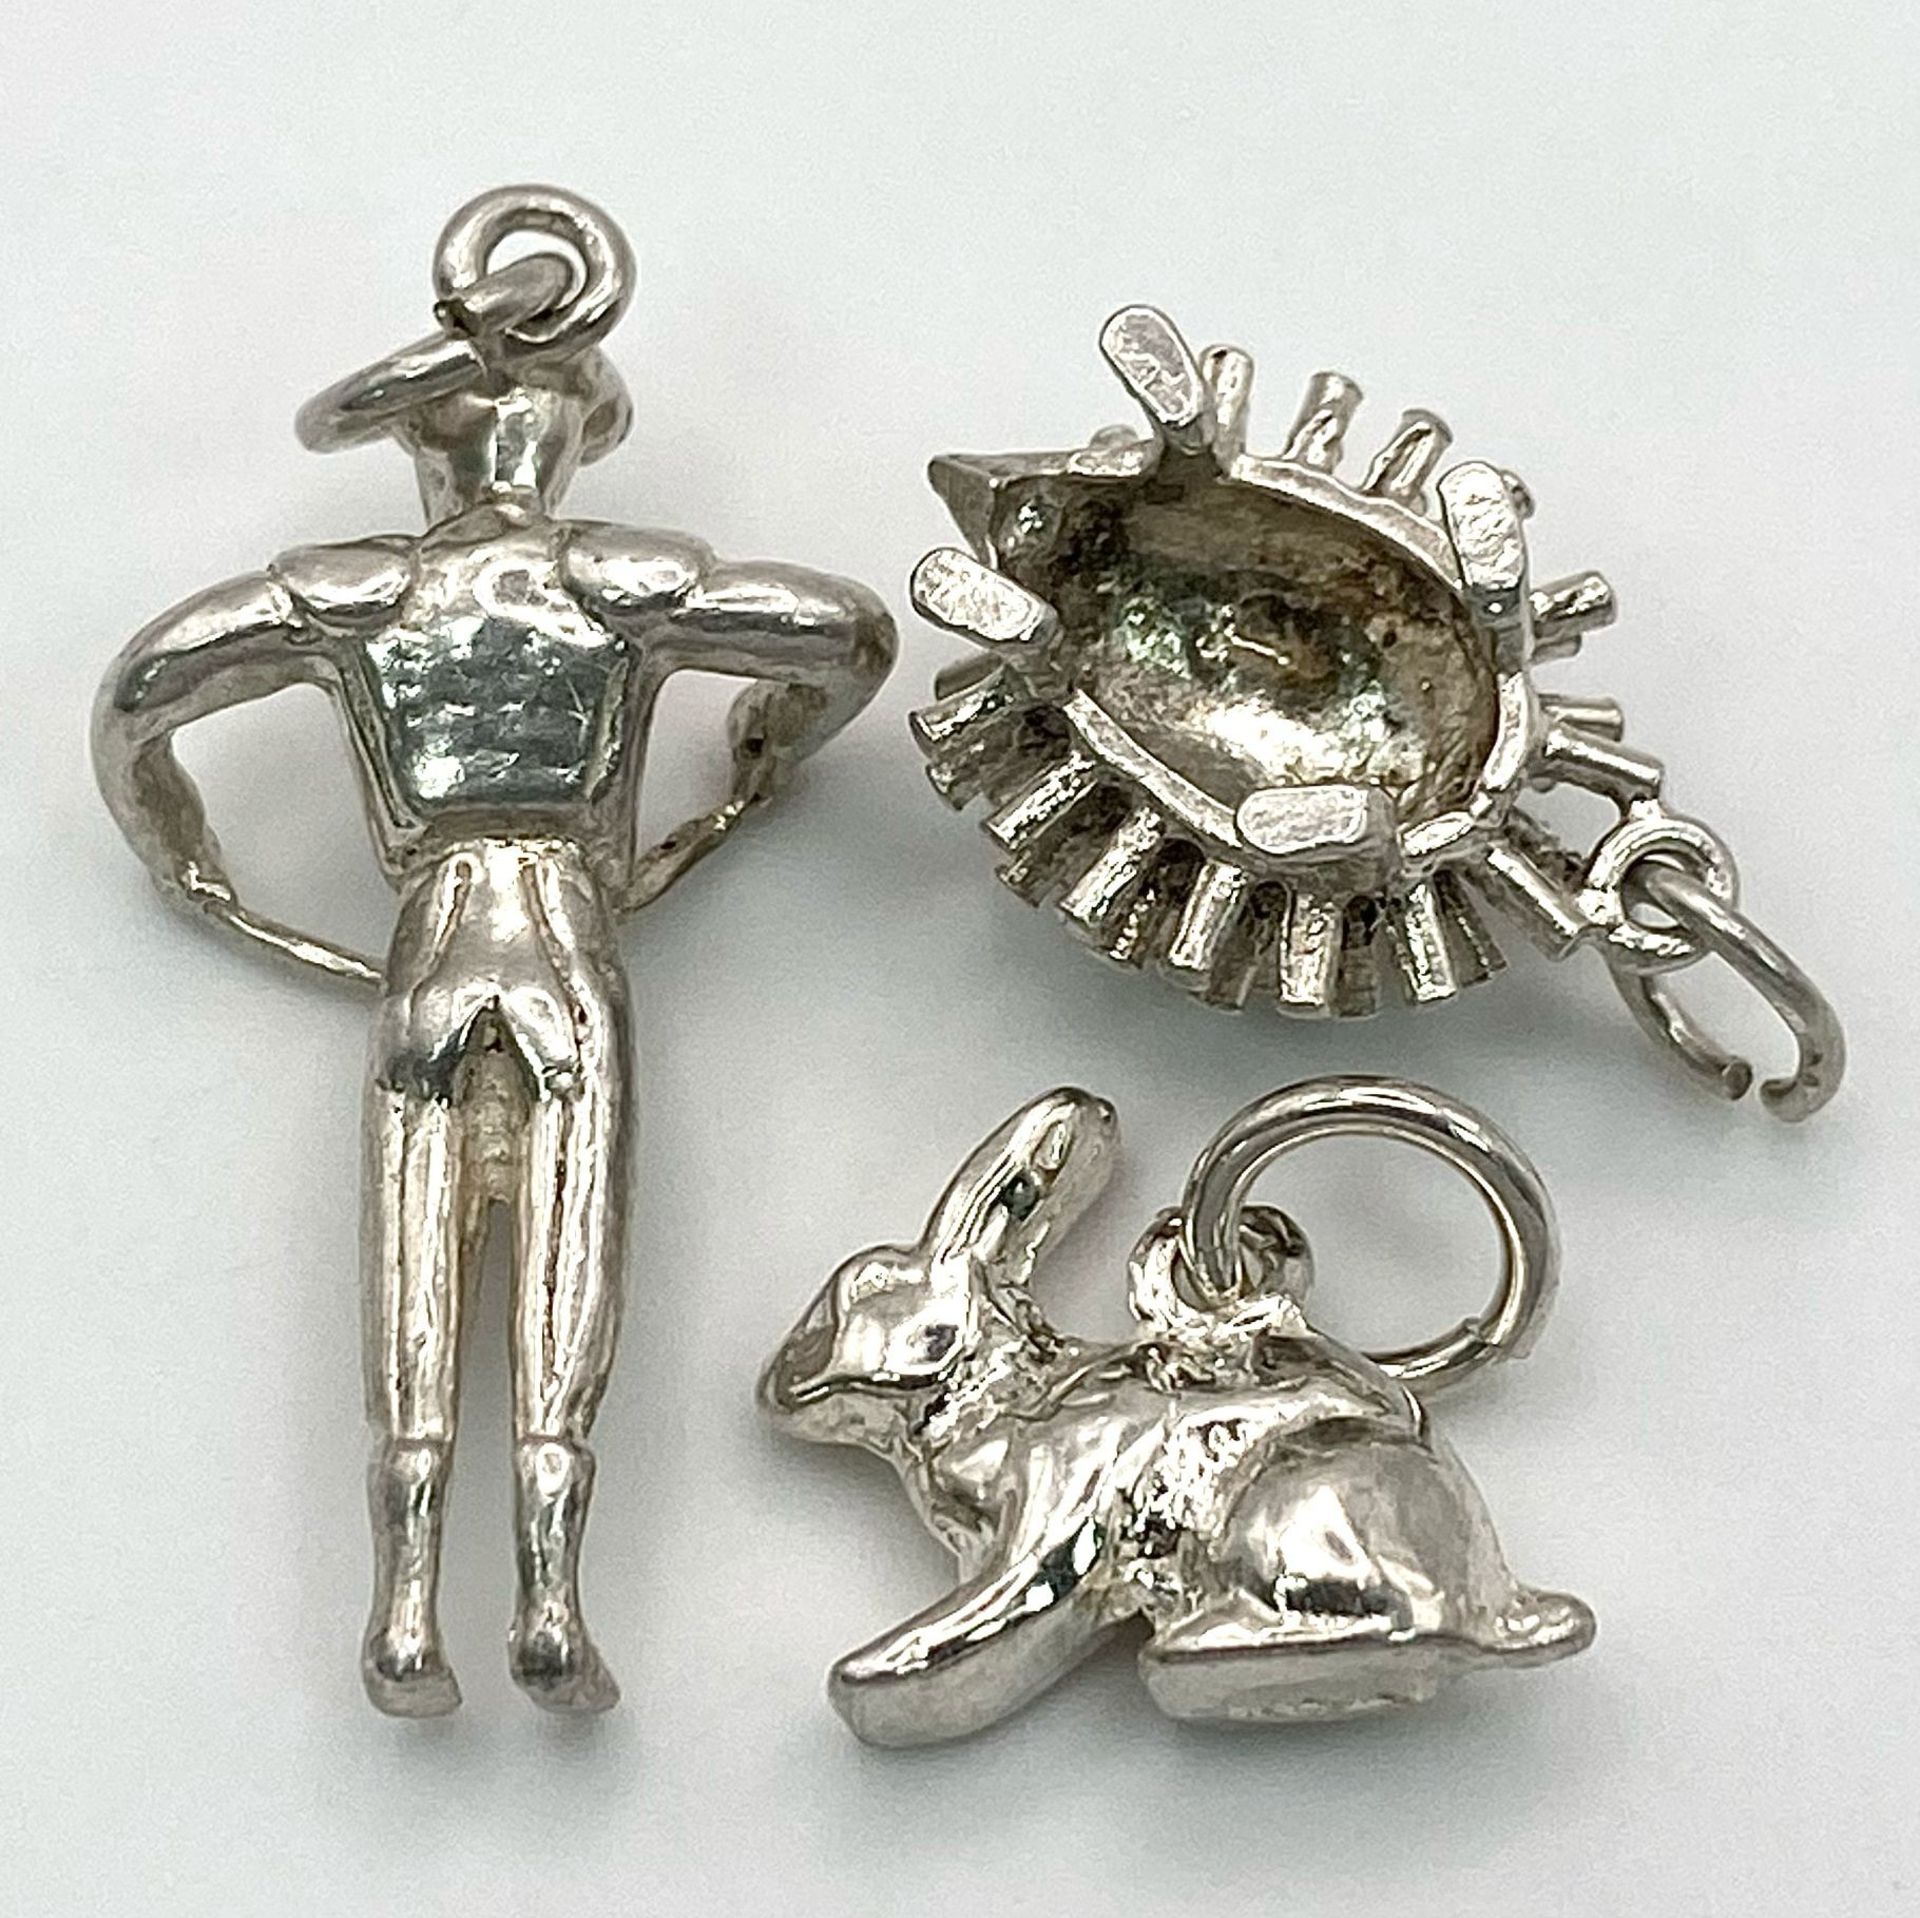 Sterling silver selection of 3 charms including rabbit, hedgehog and man, 6.3g total weight. - Image 2 of 3